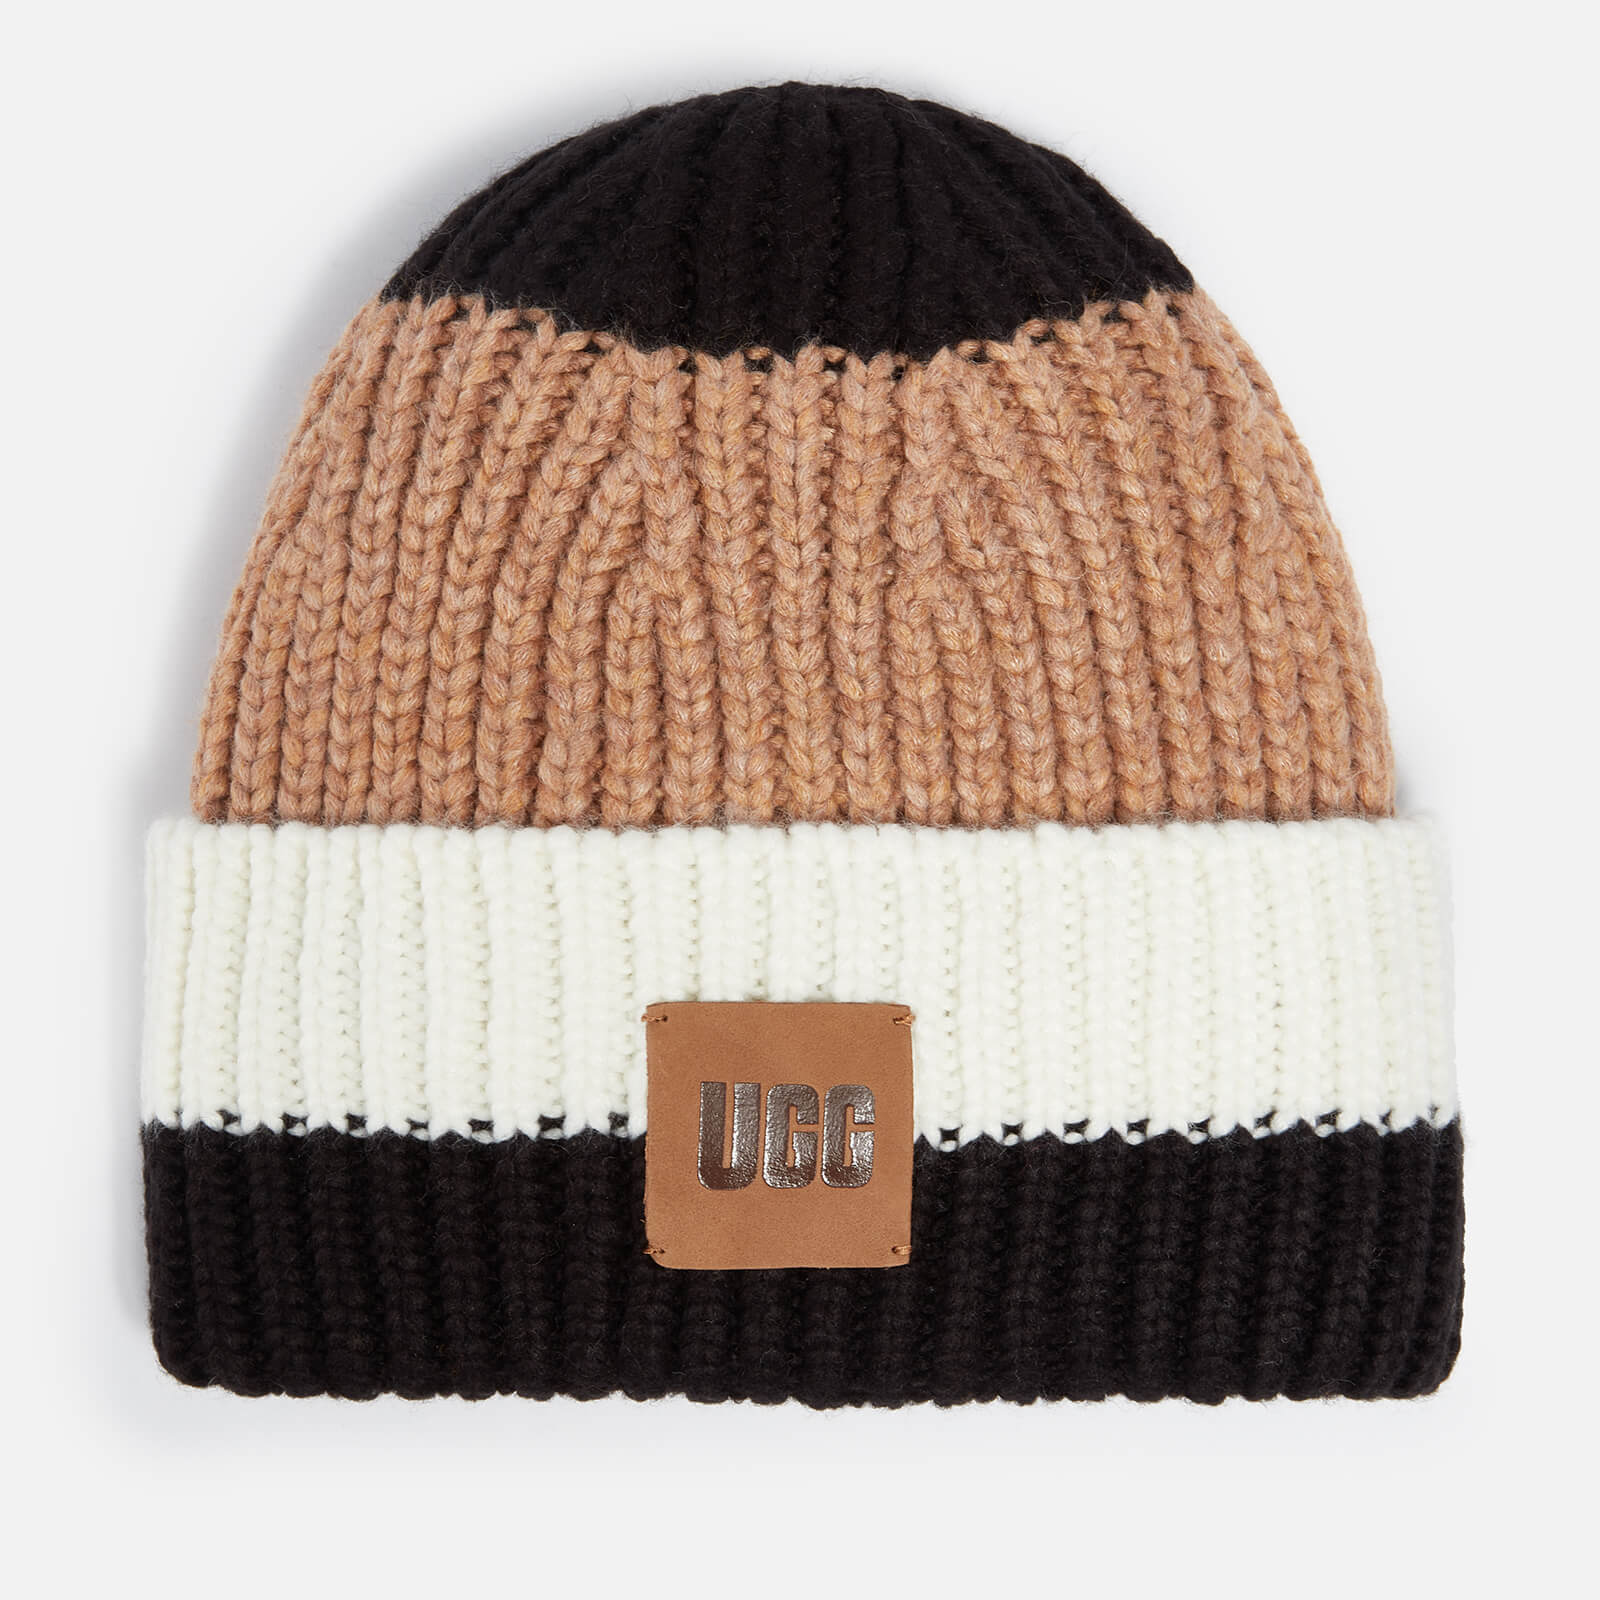 UGG Women's Airy Knit Ribbed Beanie - Chestnut Multi